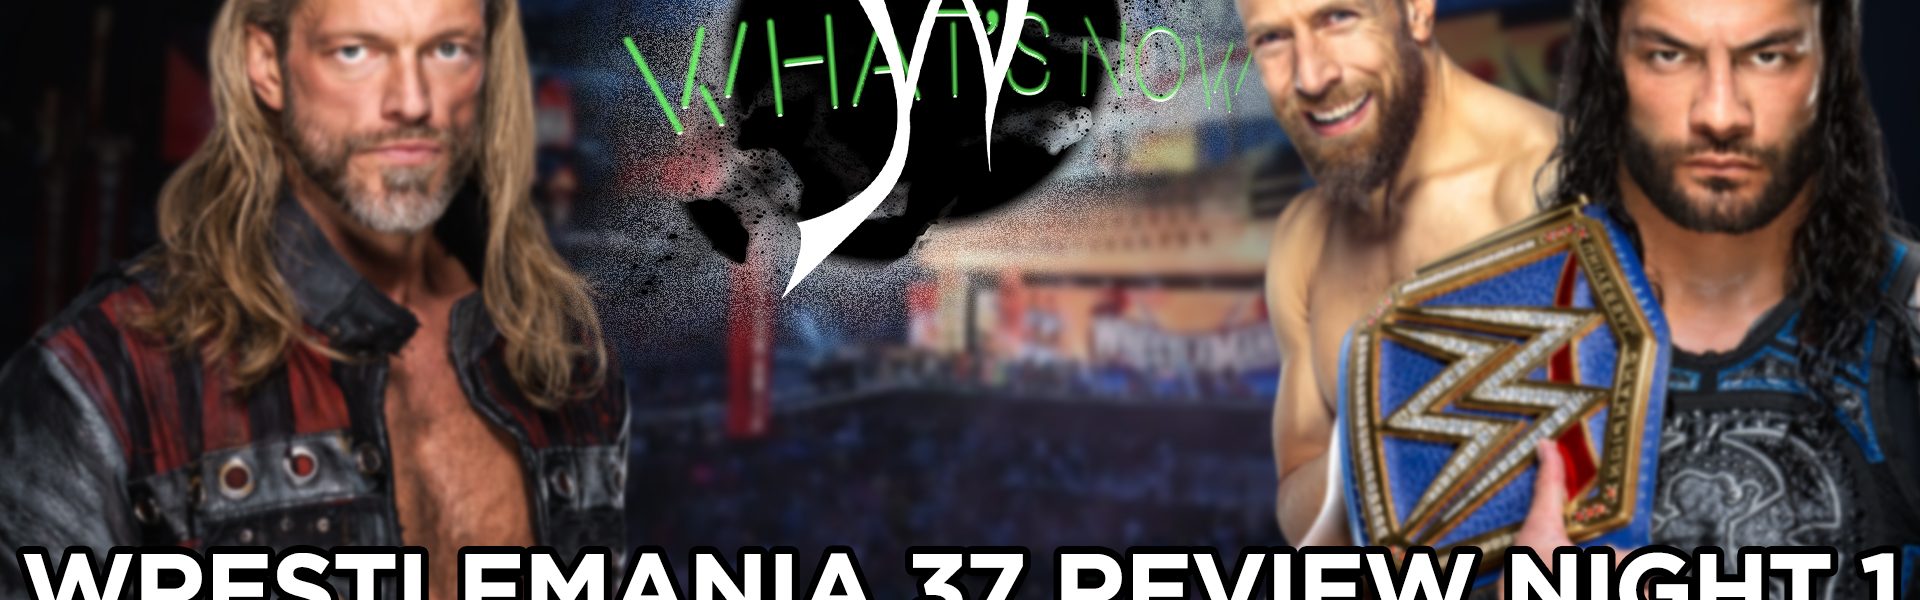 WrestleMania 37 Review Night 1 e pronostici Night 2 - What's Now